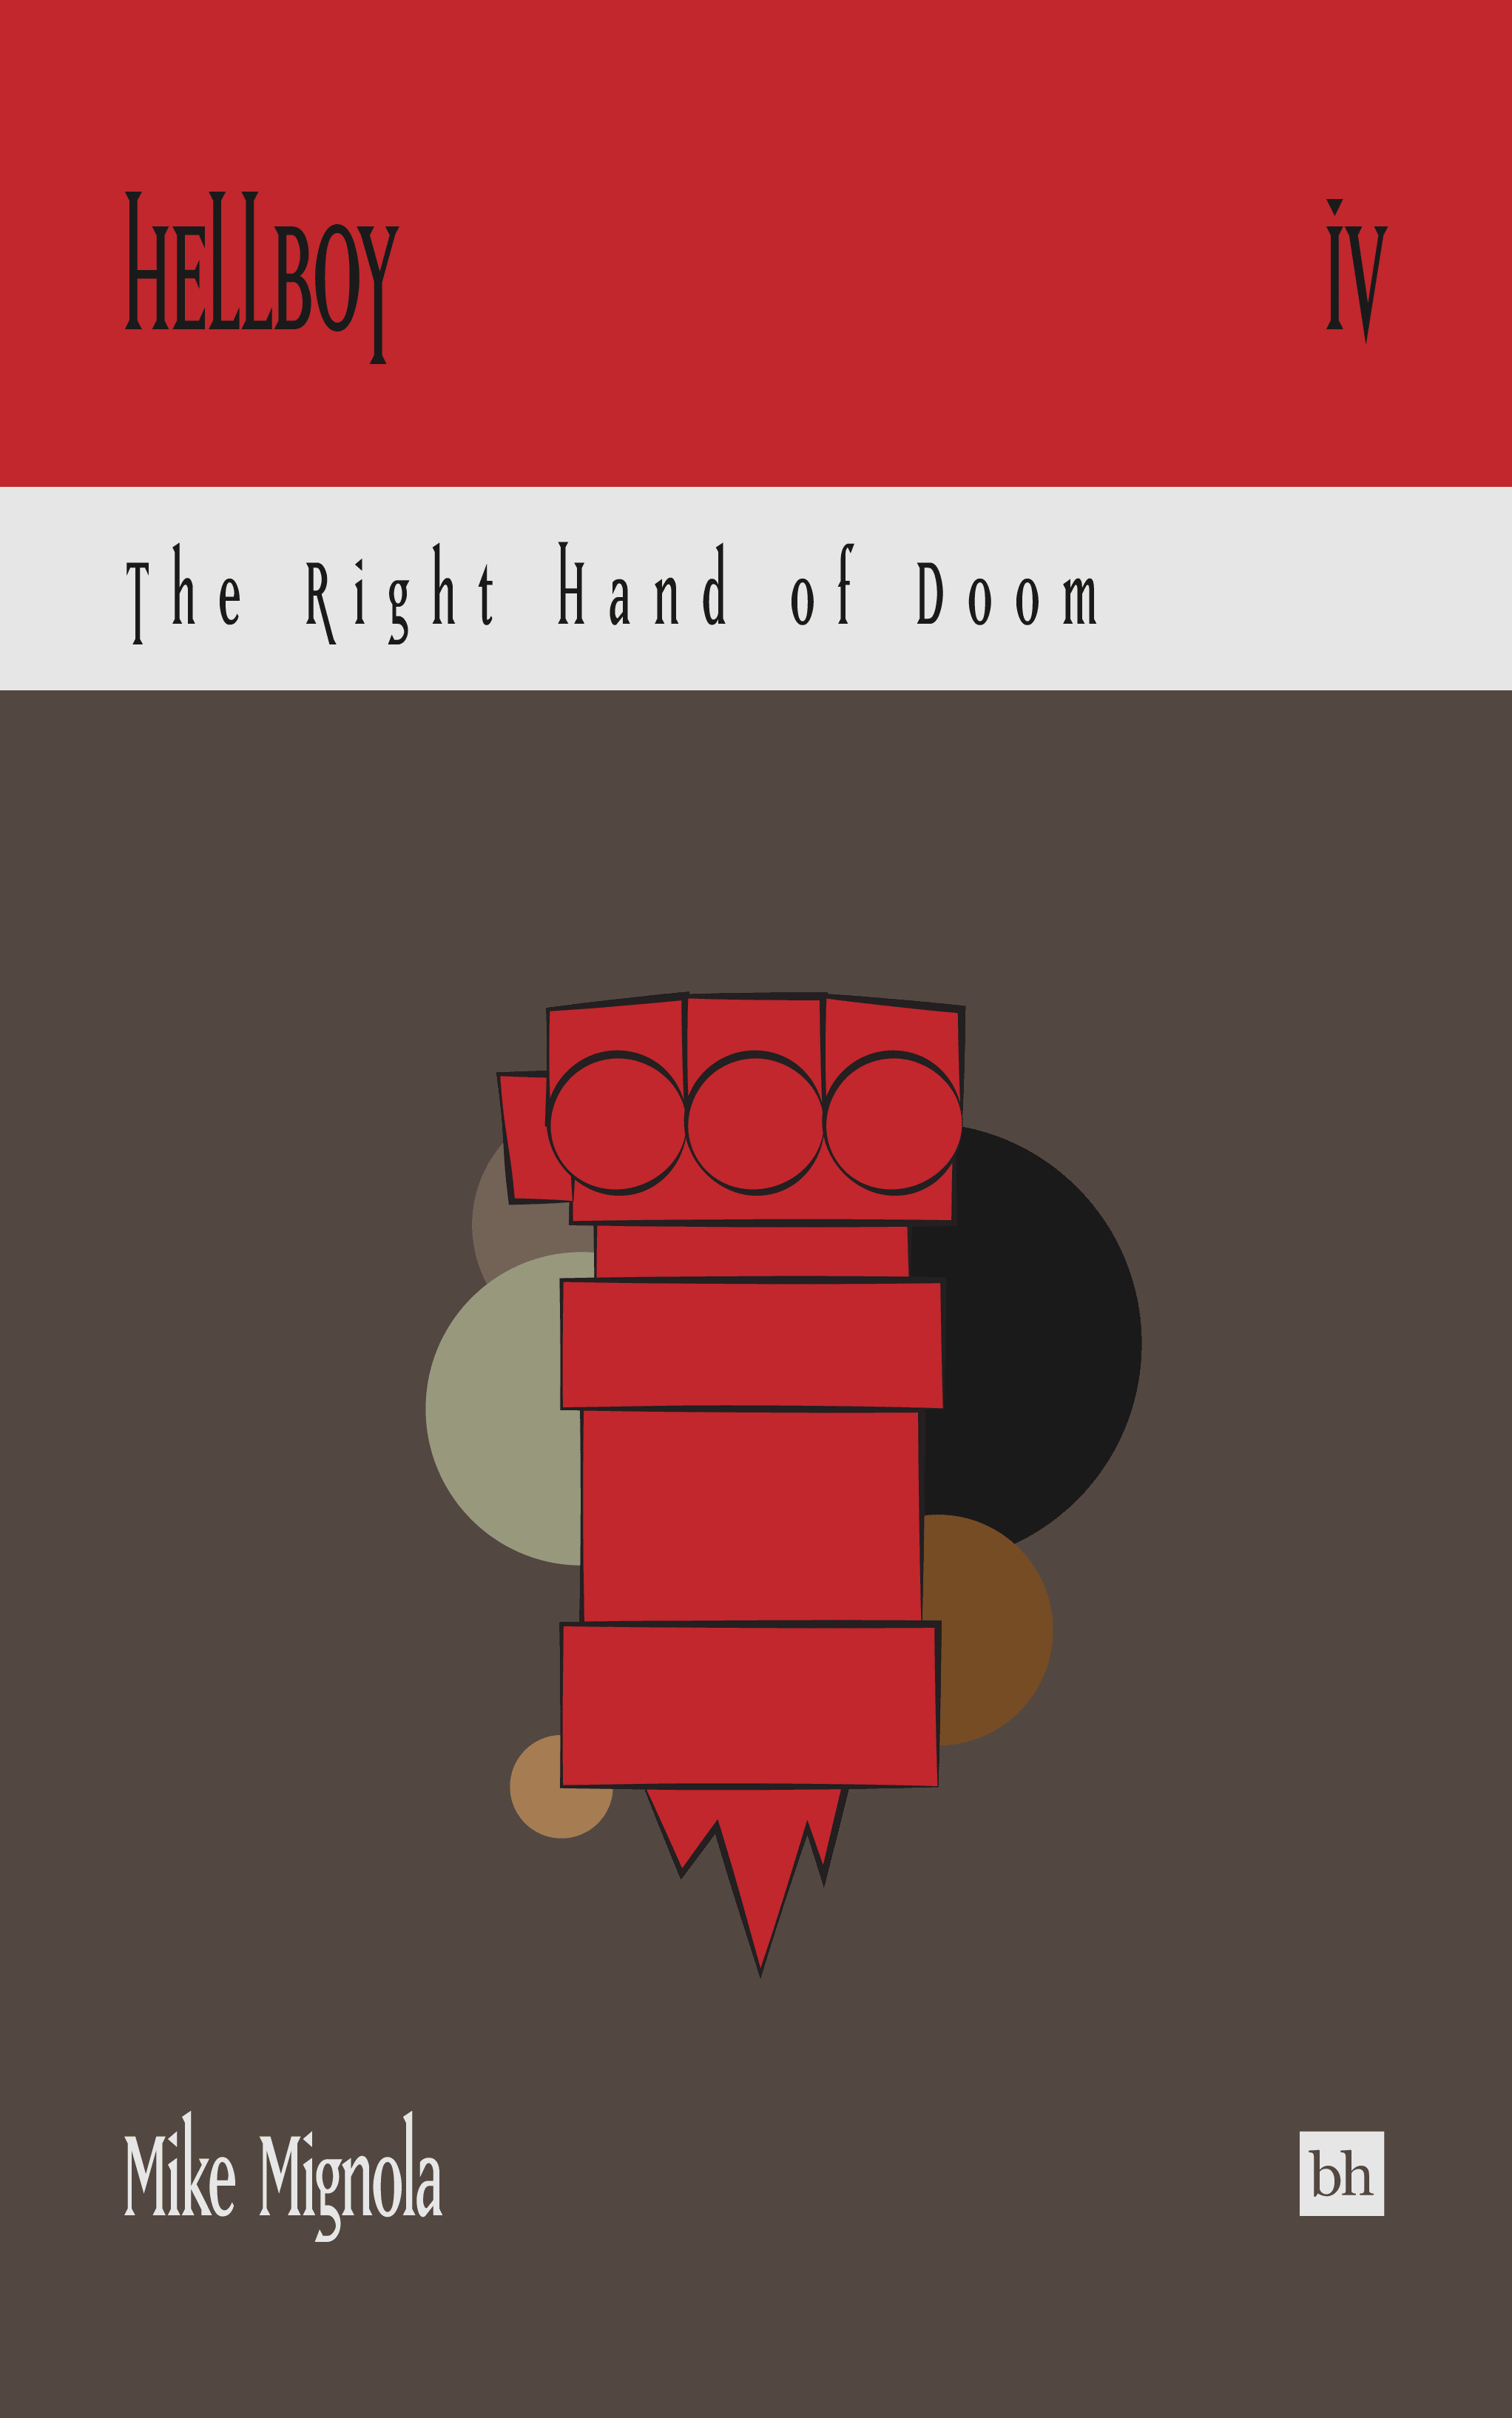 Book cover mock thumbnail for Hellboy: The Right Hand of Doom